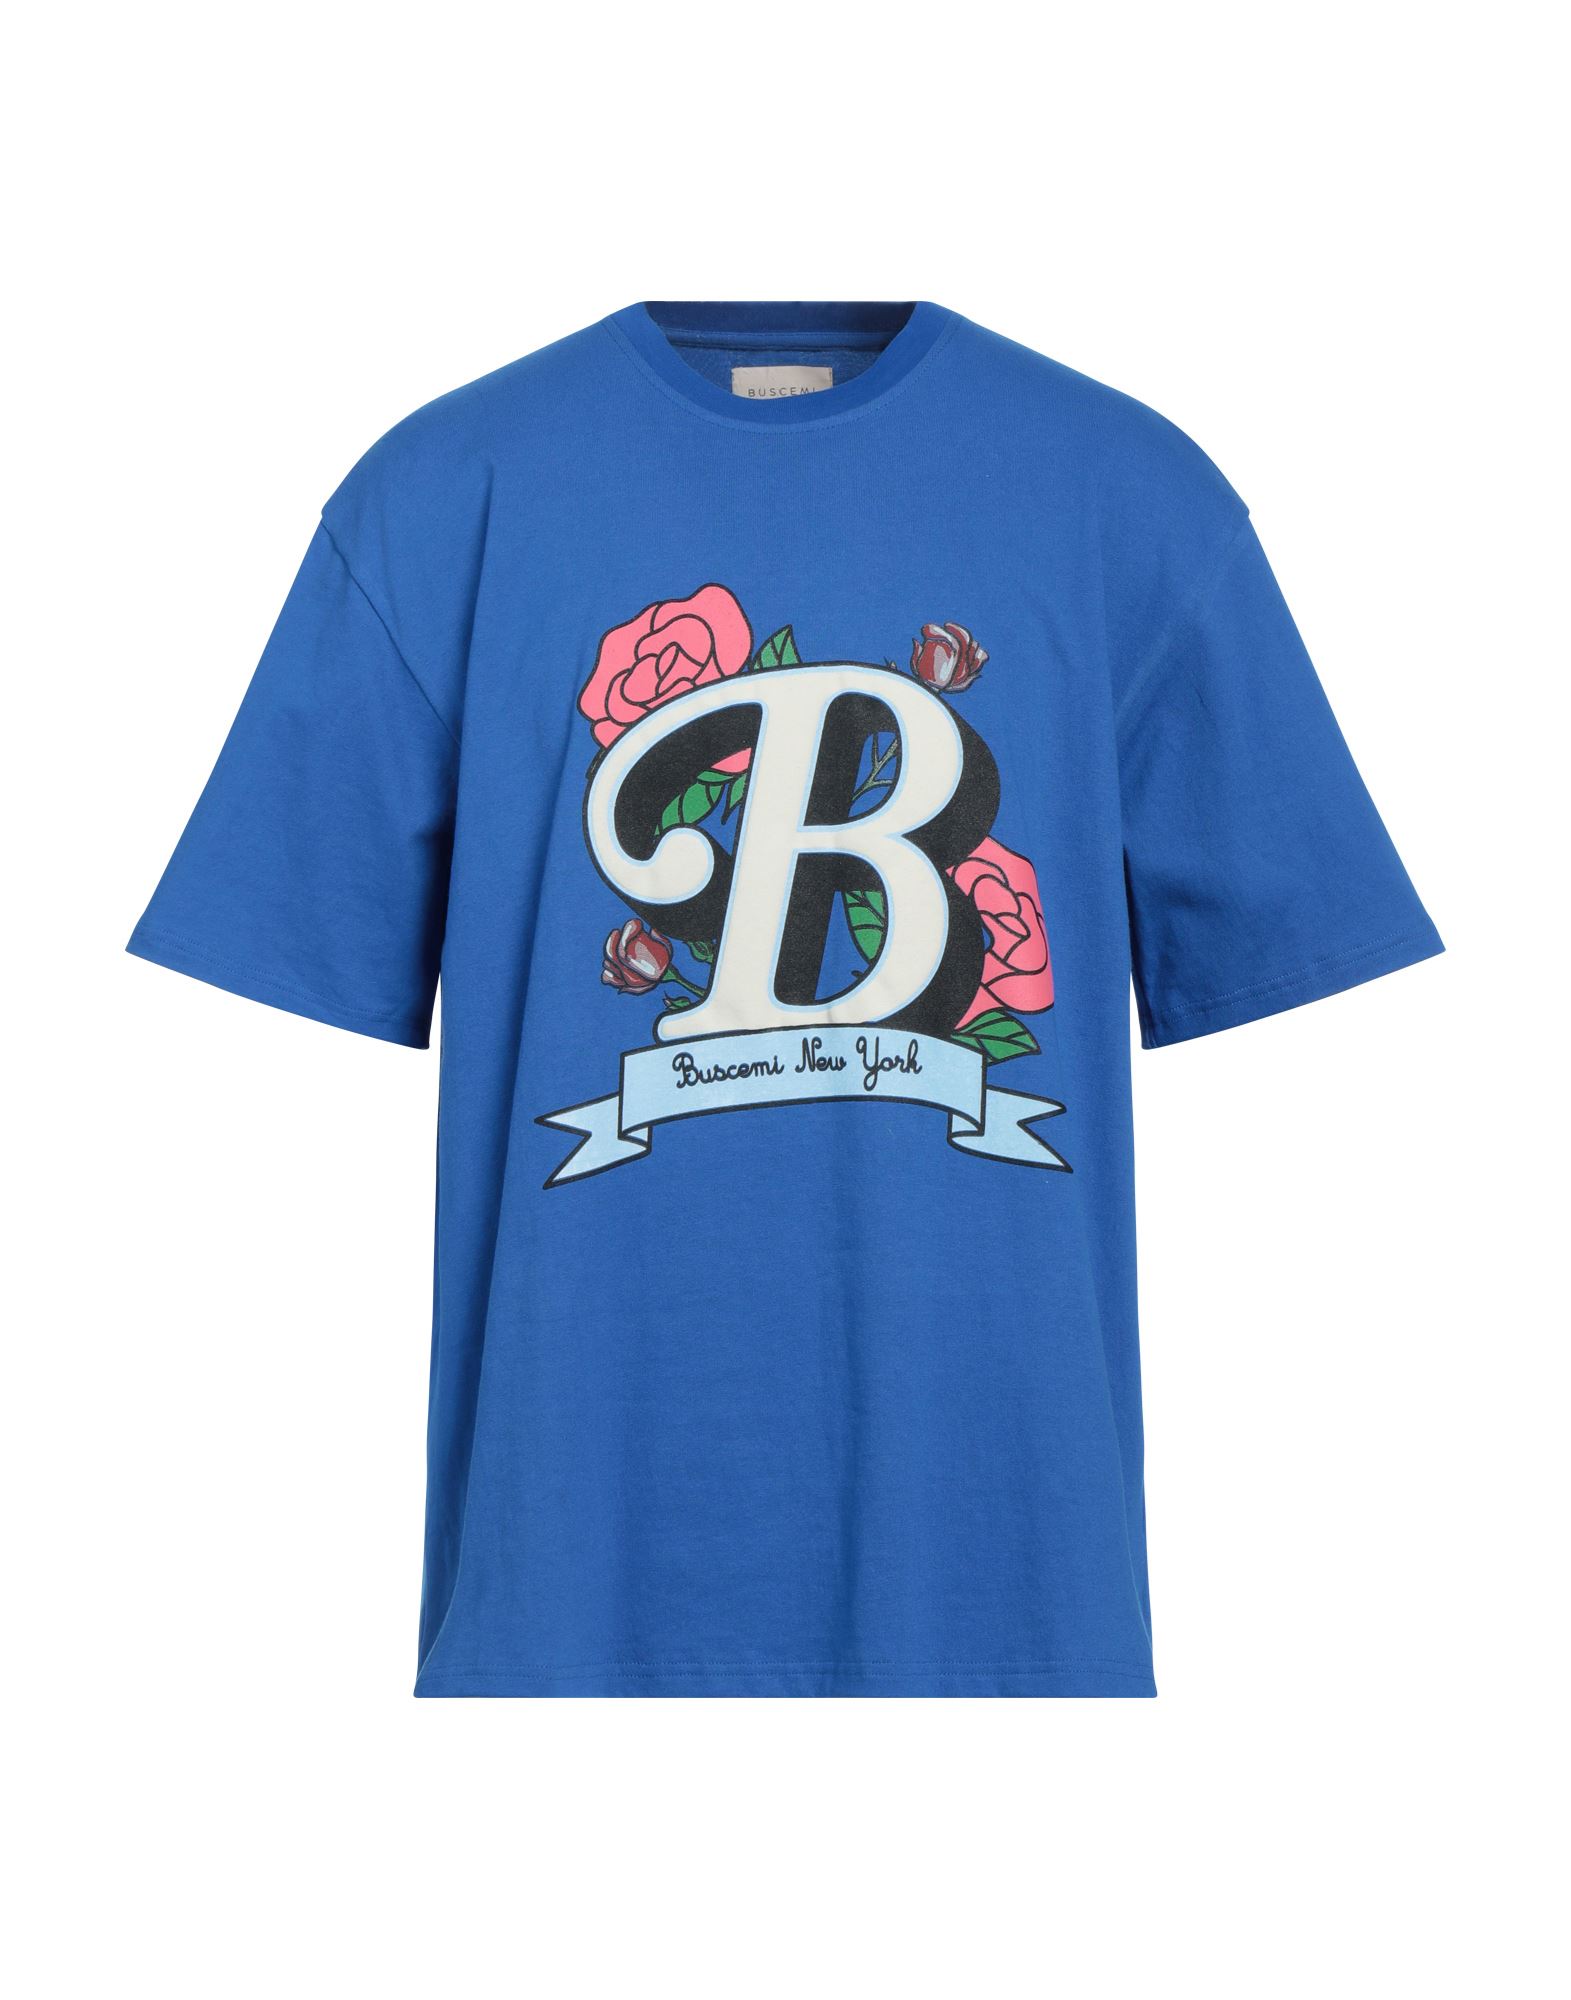 Buscemi Cotton Knitted T-shirt Blue